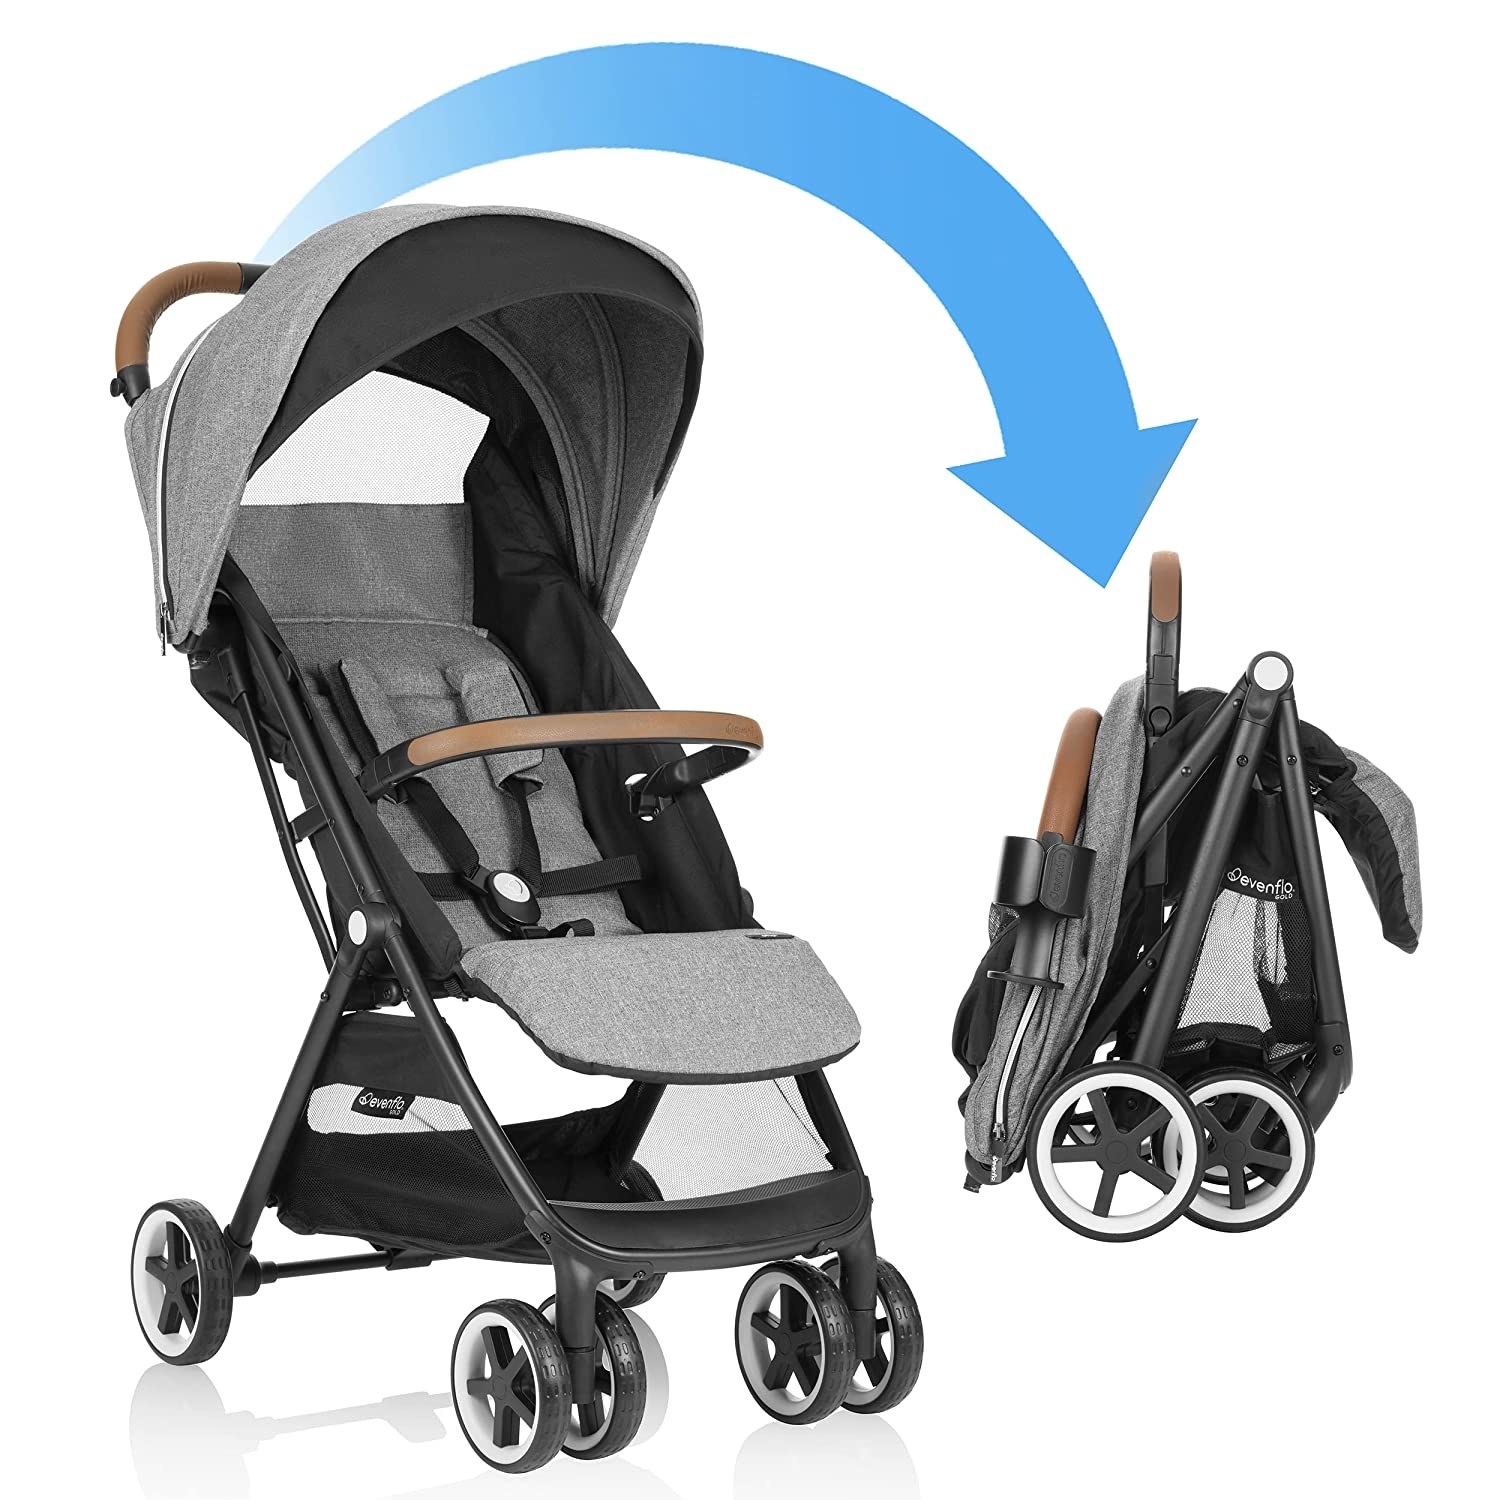 the stroller and then the stroller folded in half